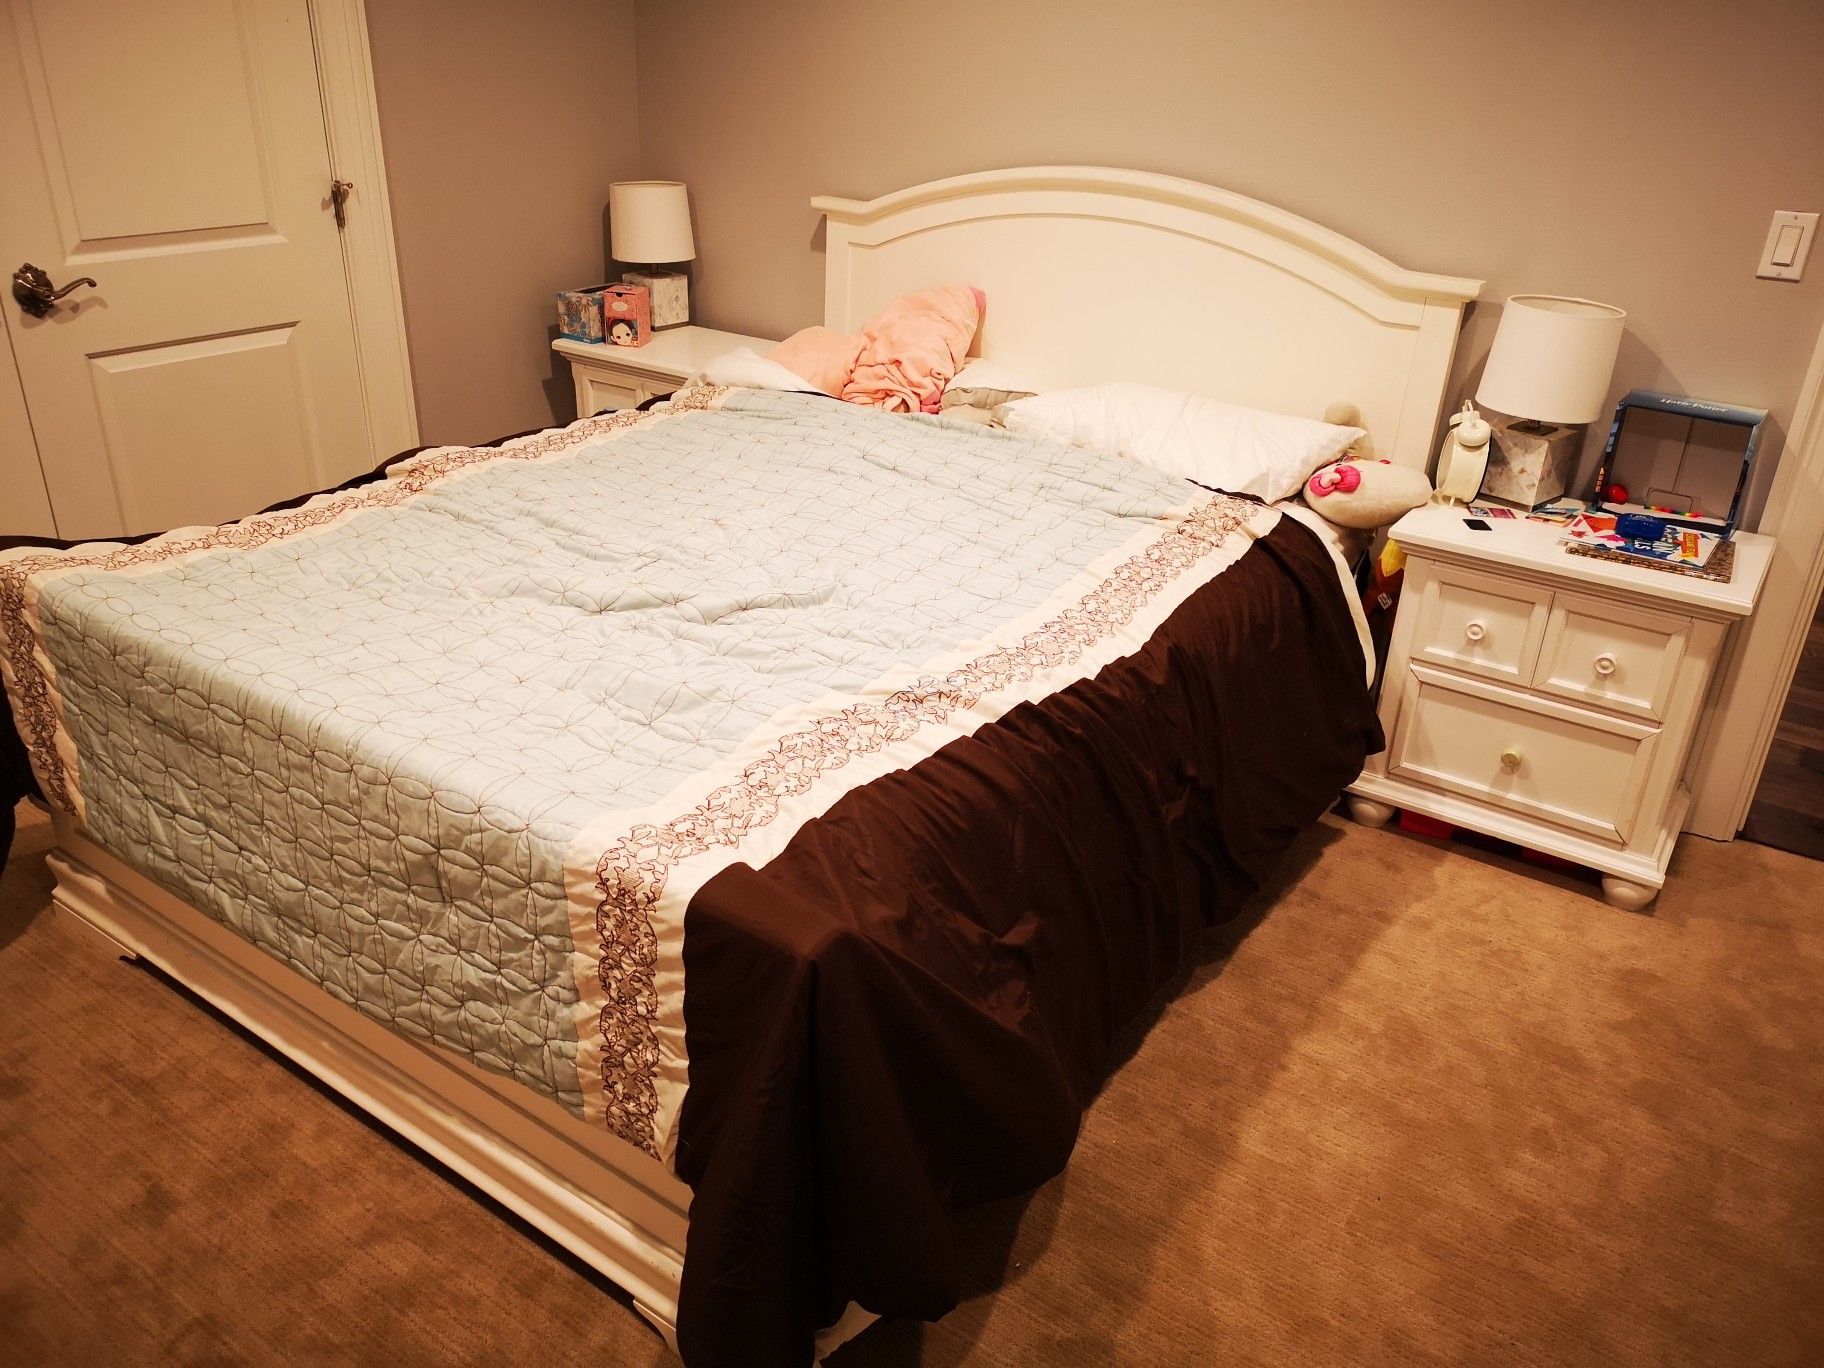 Queen size bed with mattress ＆ 2 night stands